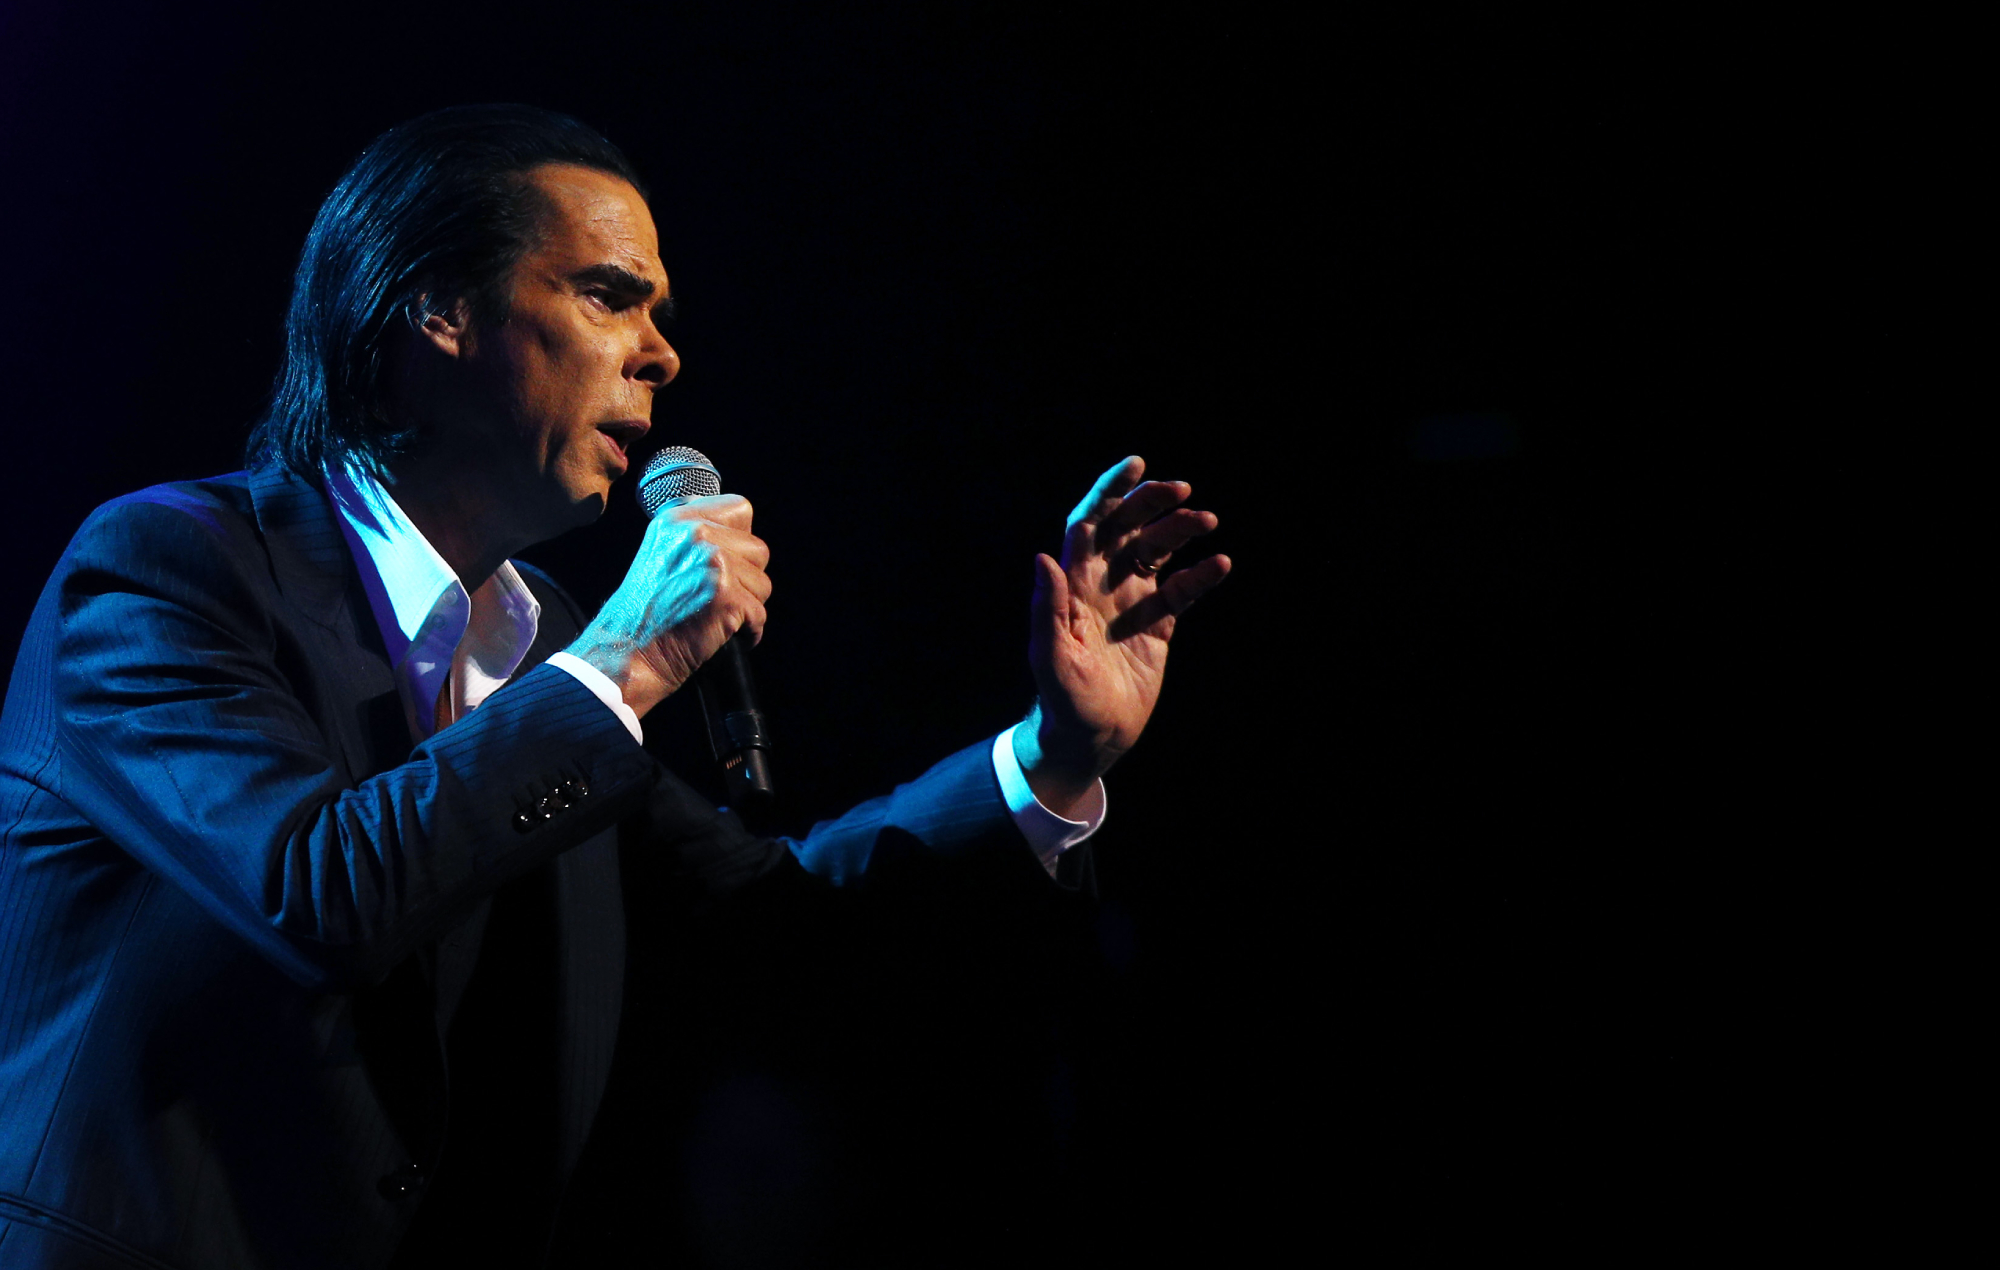 Nick Cave performs moving cover of The Pogues’ ‘A Rainy Night In Soho’ at Shane MacGowan’s funeral